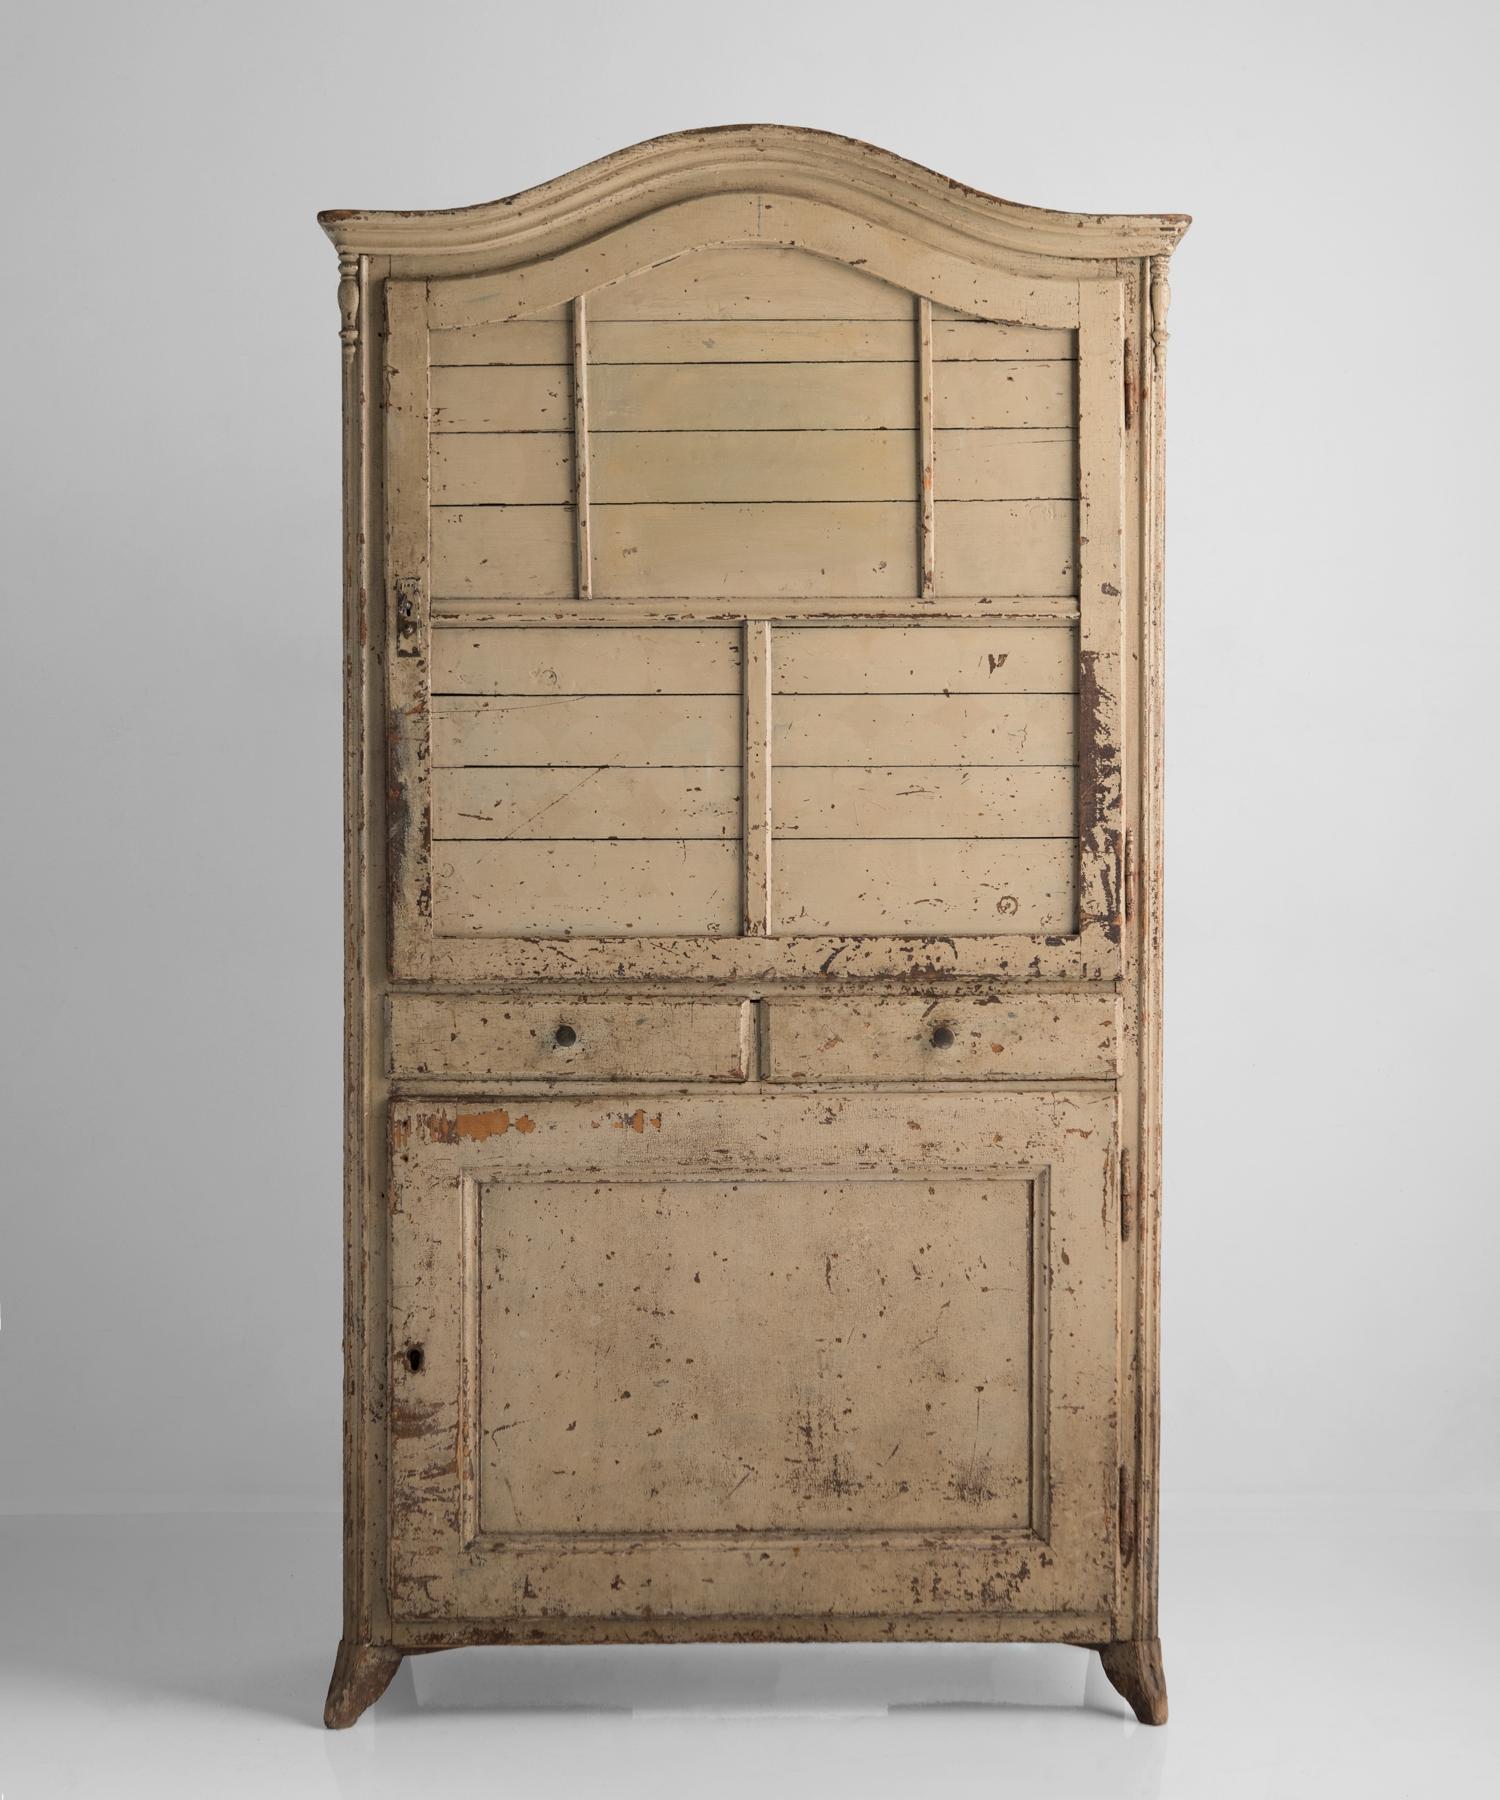 Painted cupboard, France, 18th century.

Wonderfully patinated, tall form with original paint.